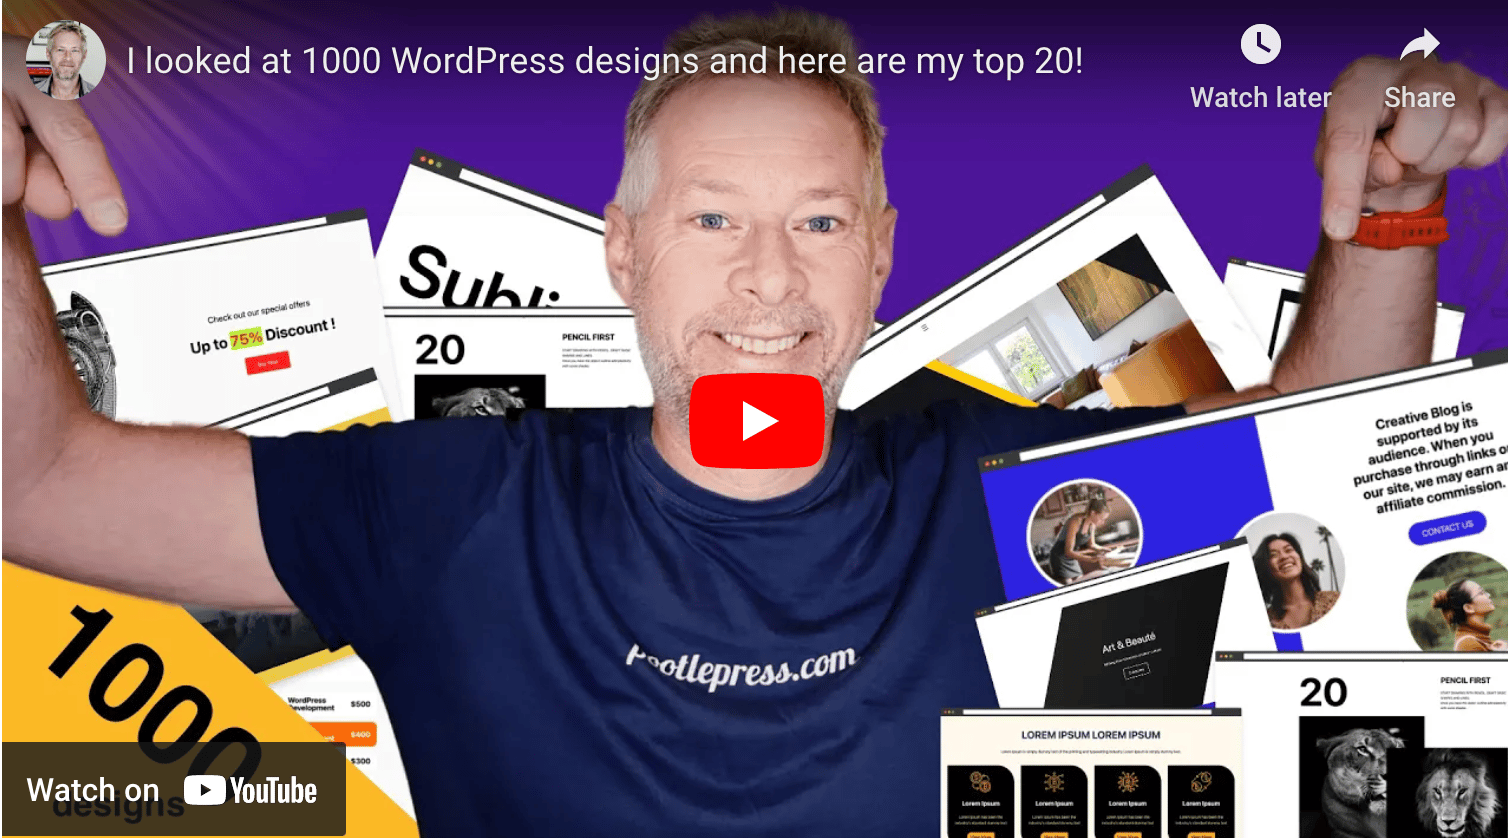 I researched 1000 WordPress designs, and here are my top 20